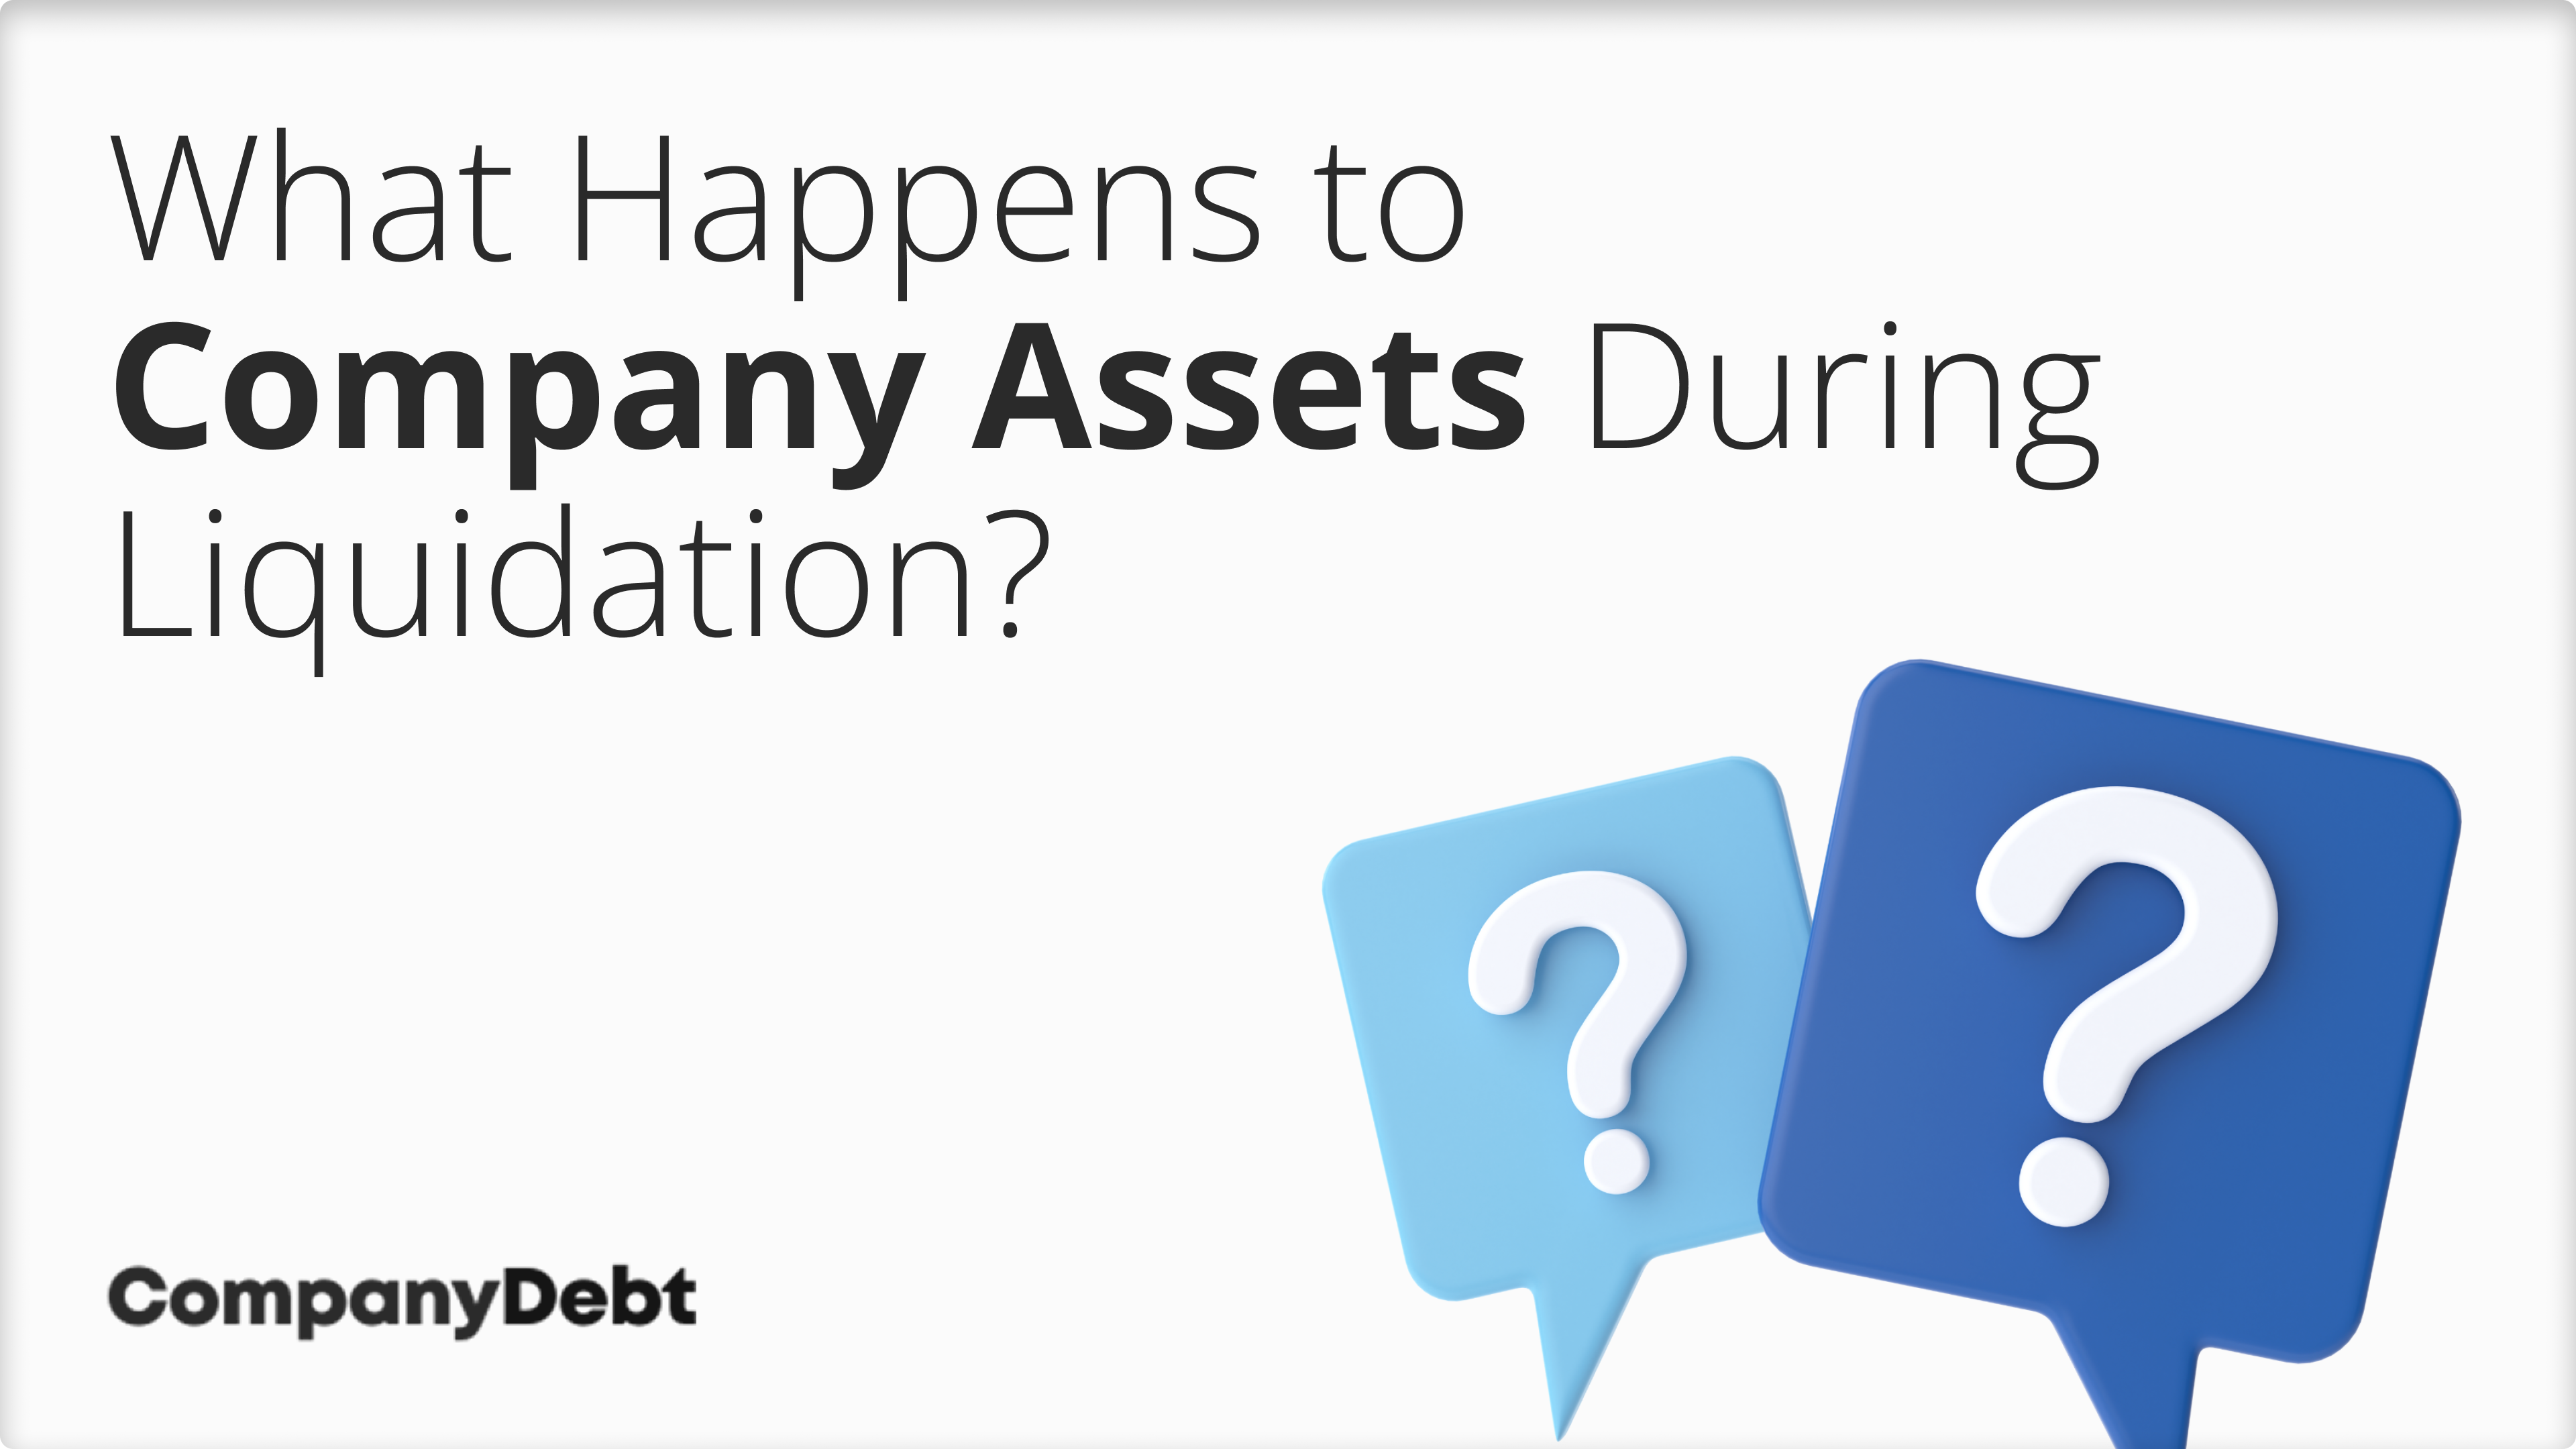 What Happens to Company Assets During Liquidation?